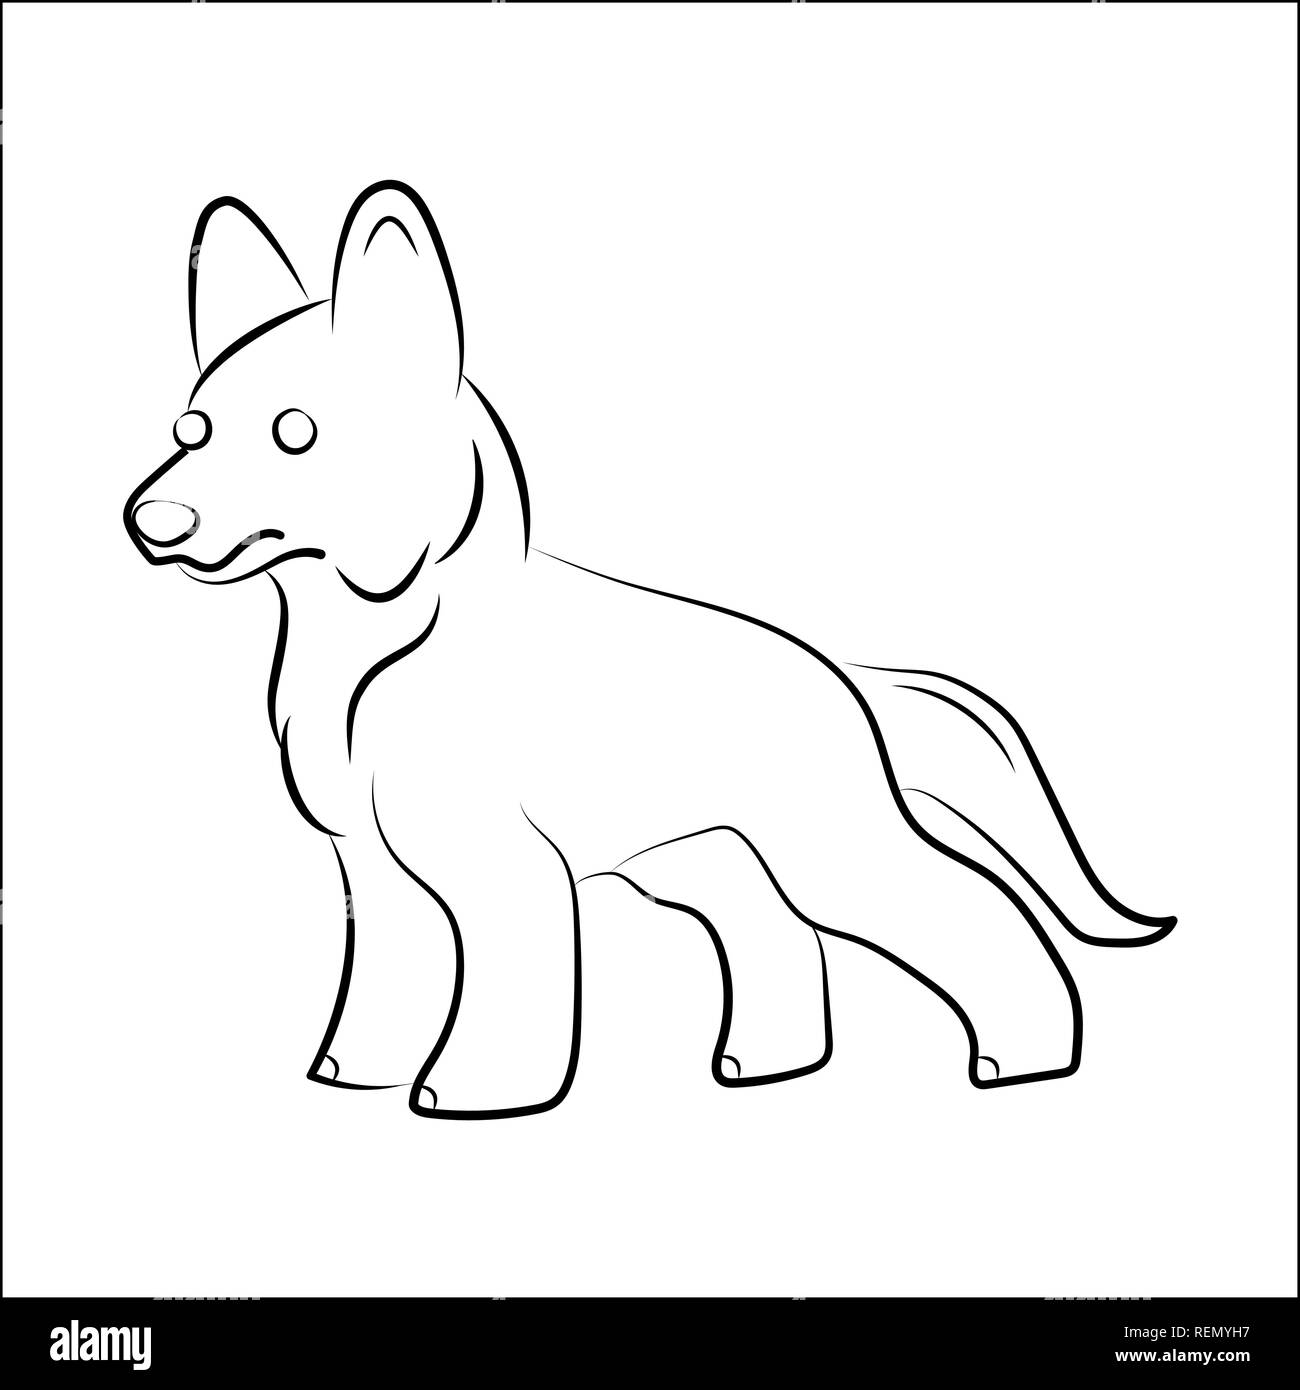 Minimalist one line drawing of a cute dog with a stylish sweater on Craiyon-saigonsouth.com.vn